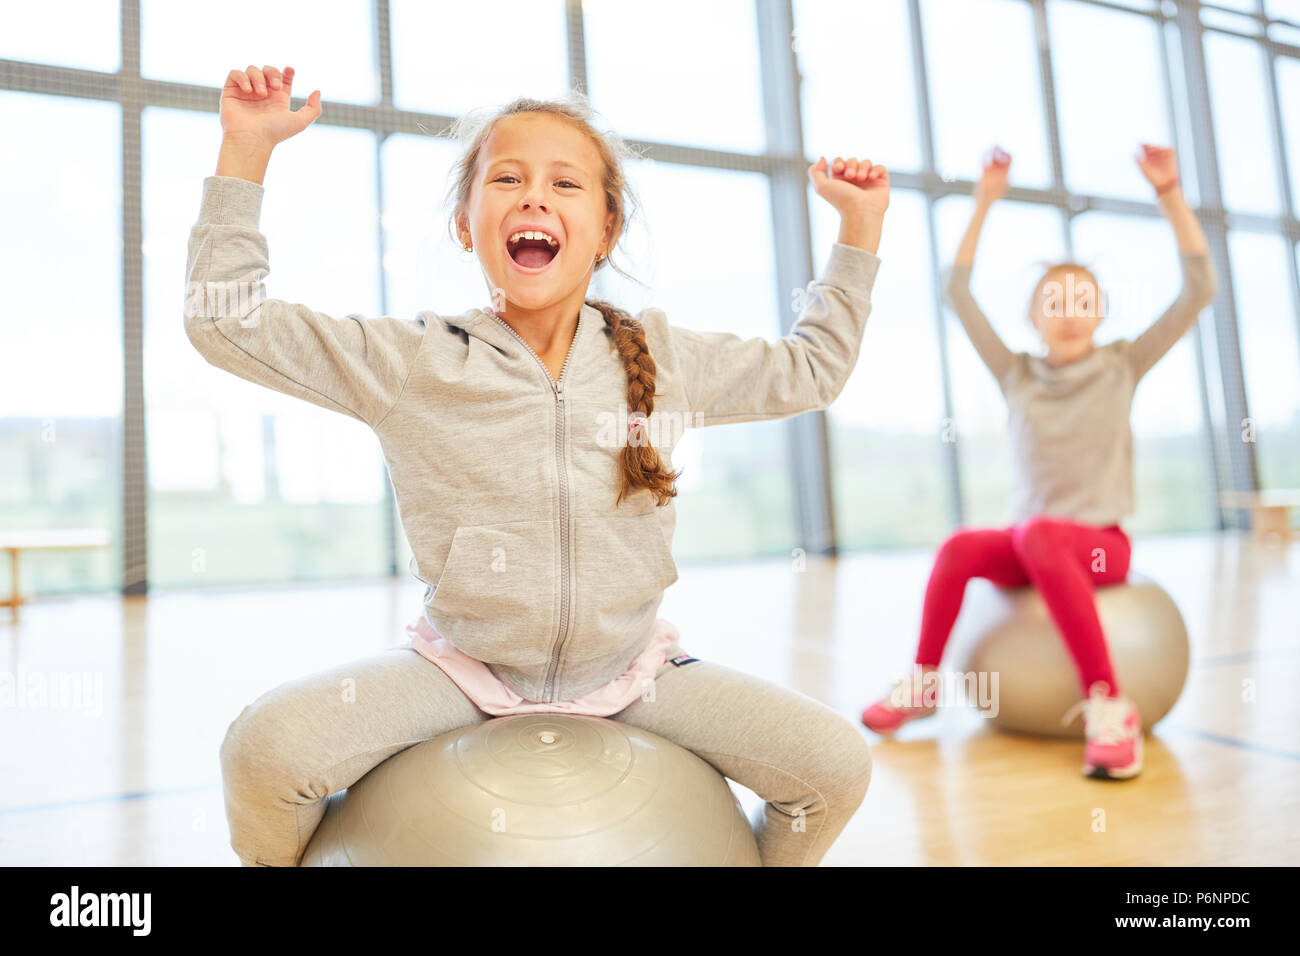 Two girls have fun in physical education with gym ball in the gym Stock Photo